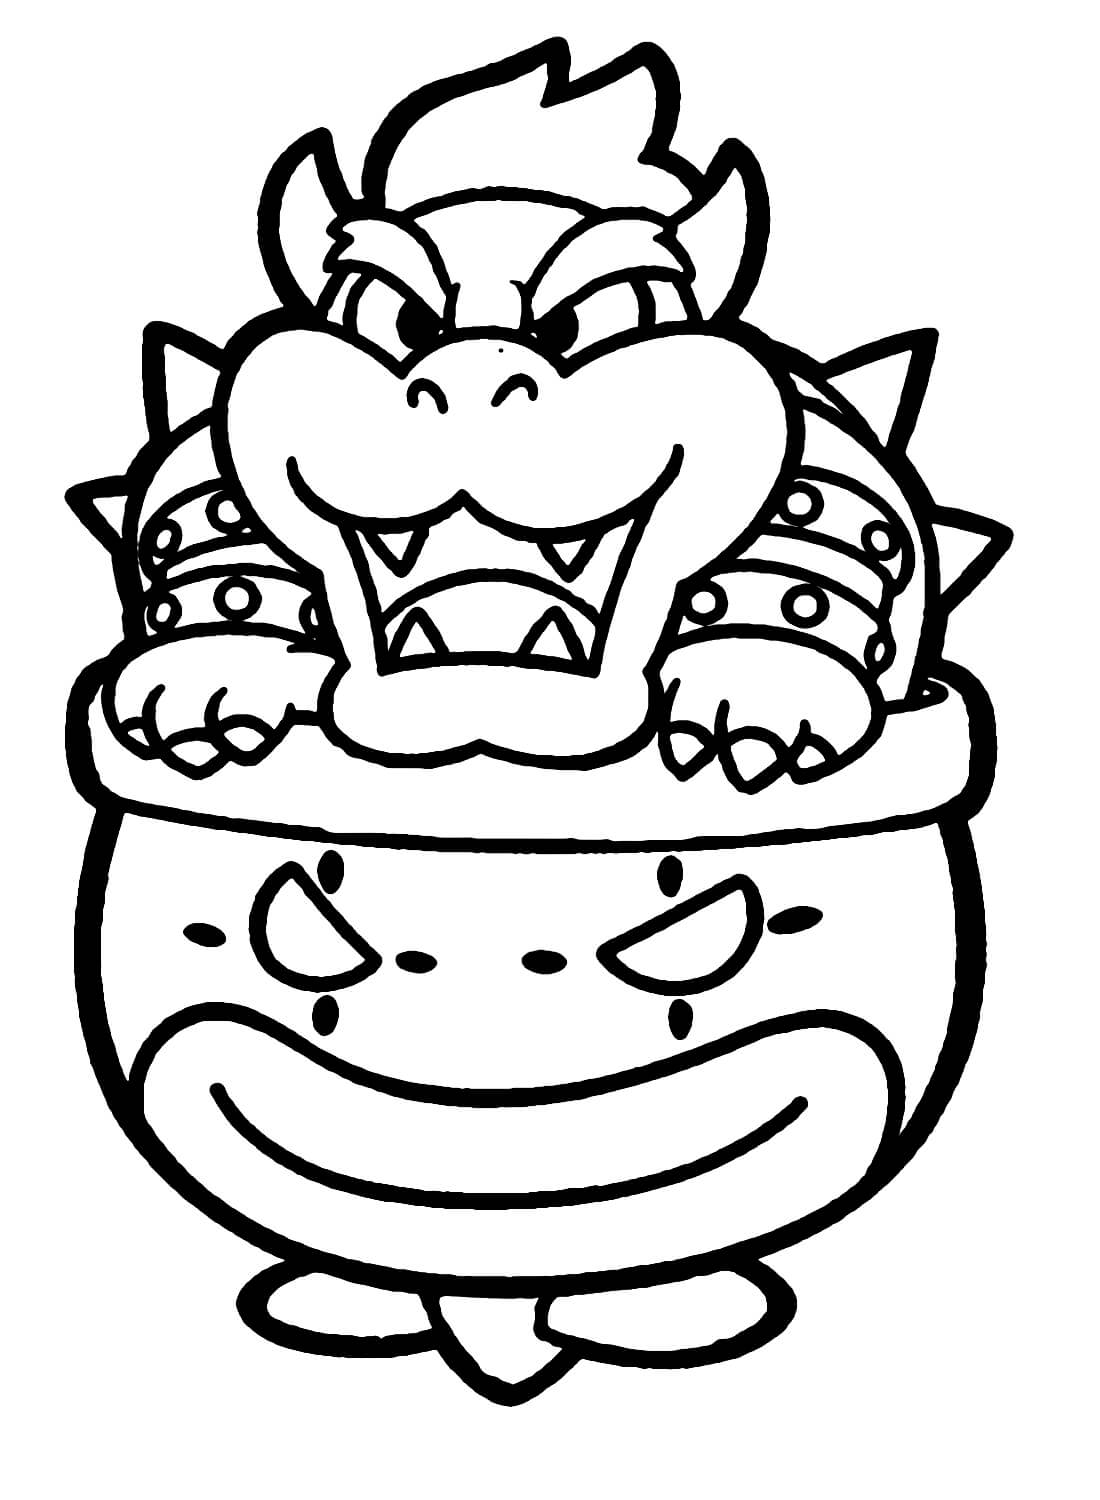 Bowser Super Mario Coloring Pages